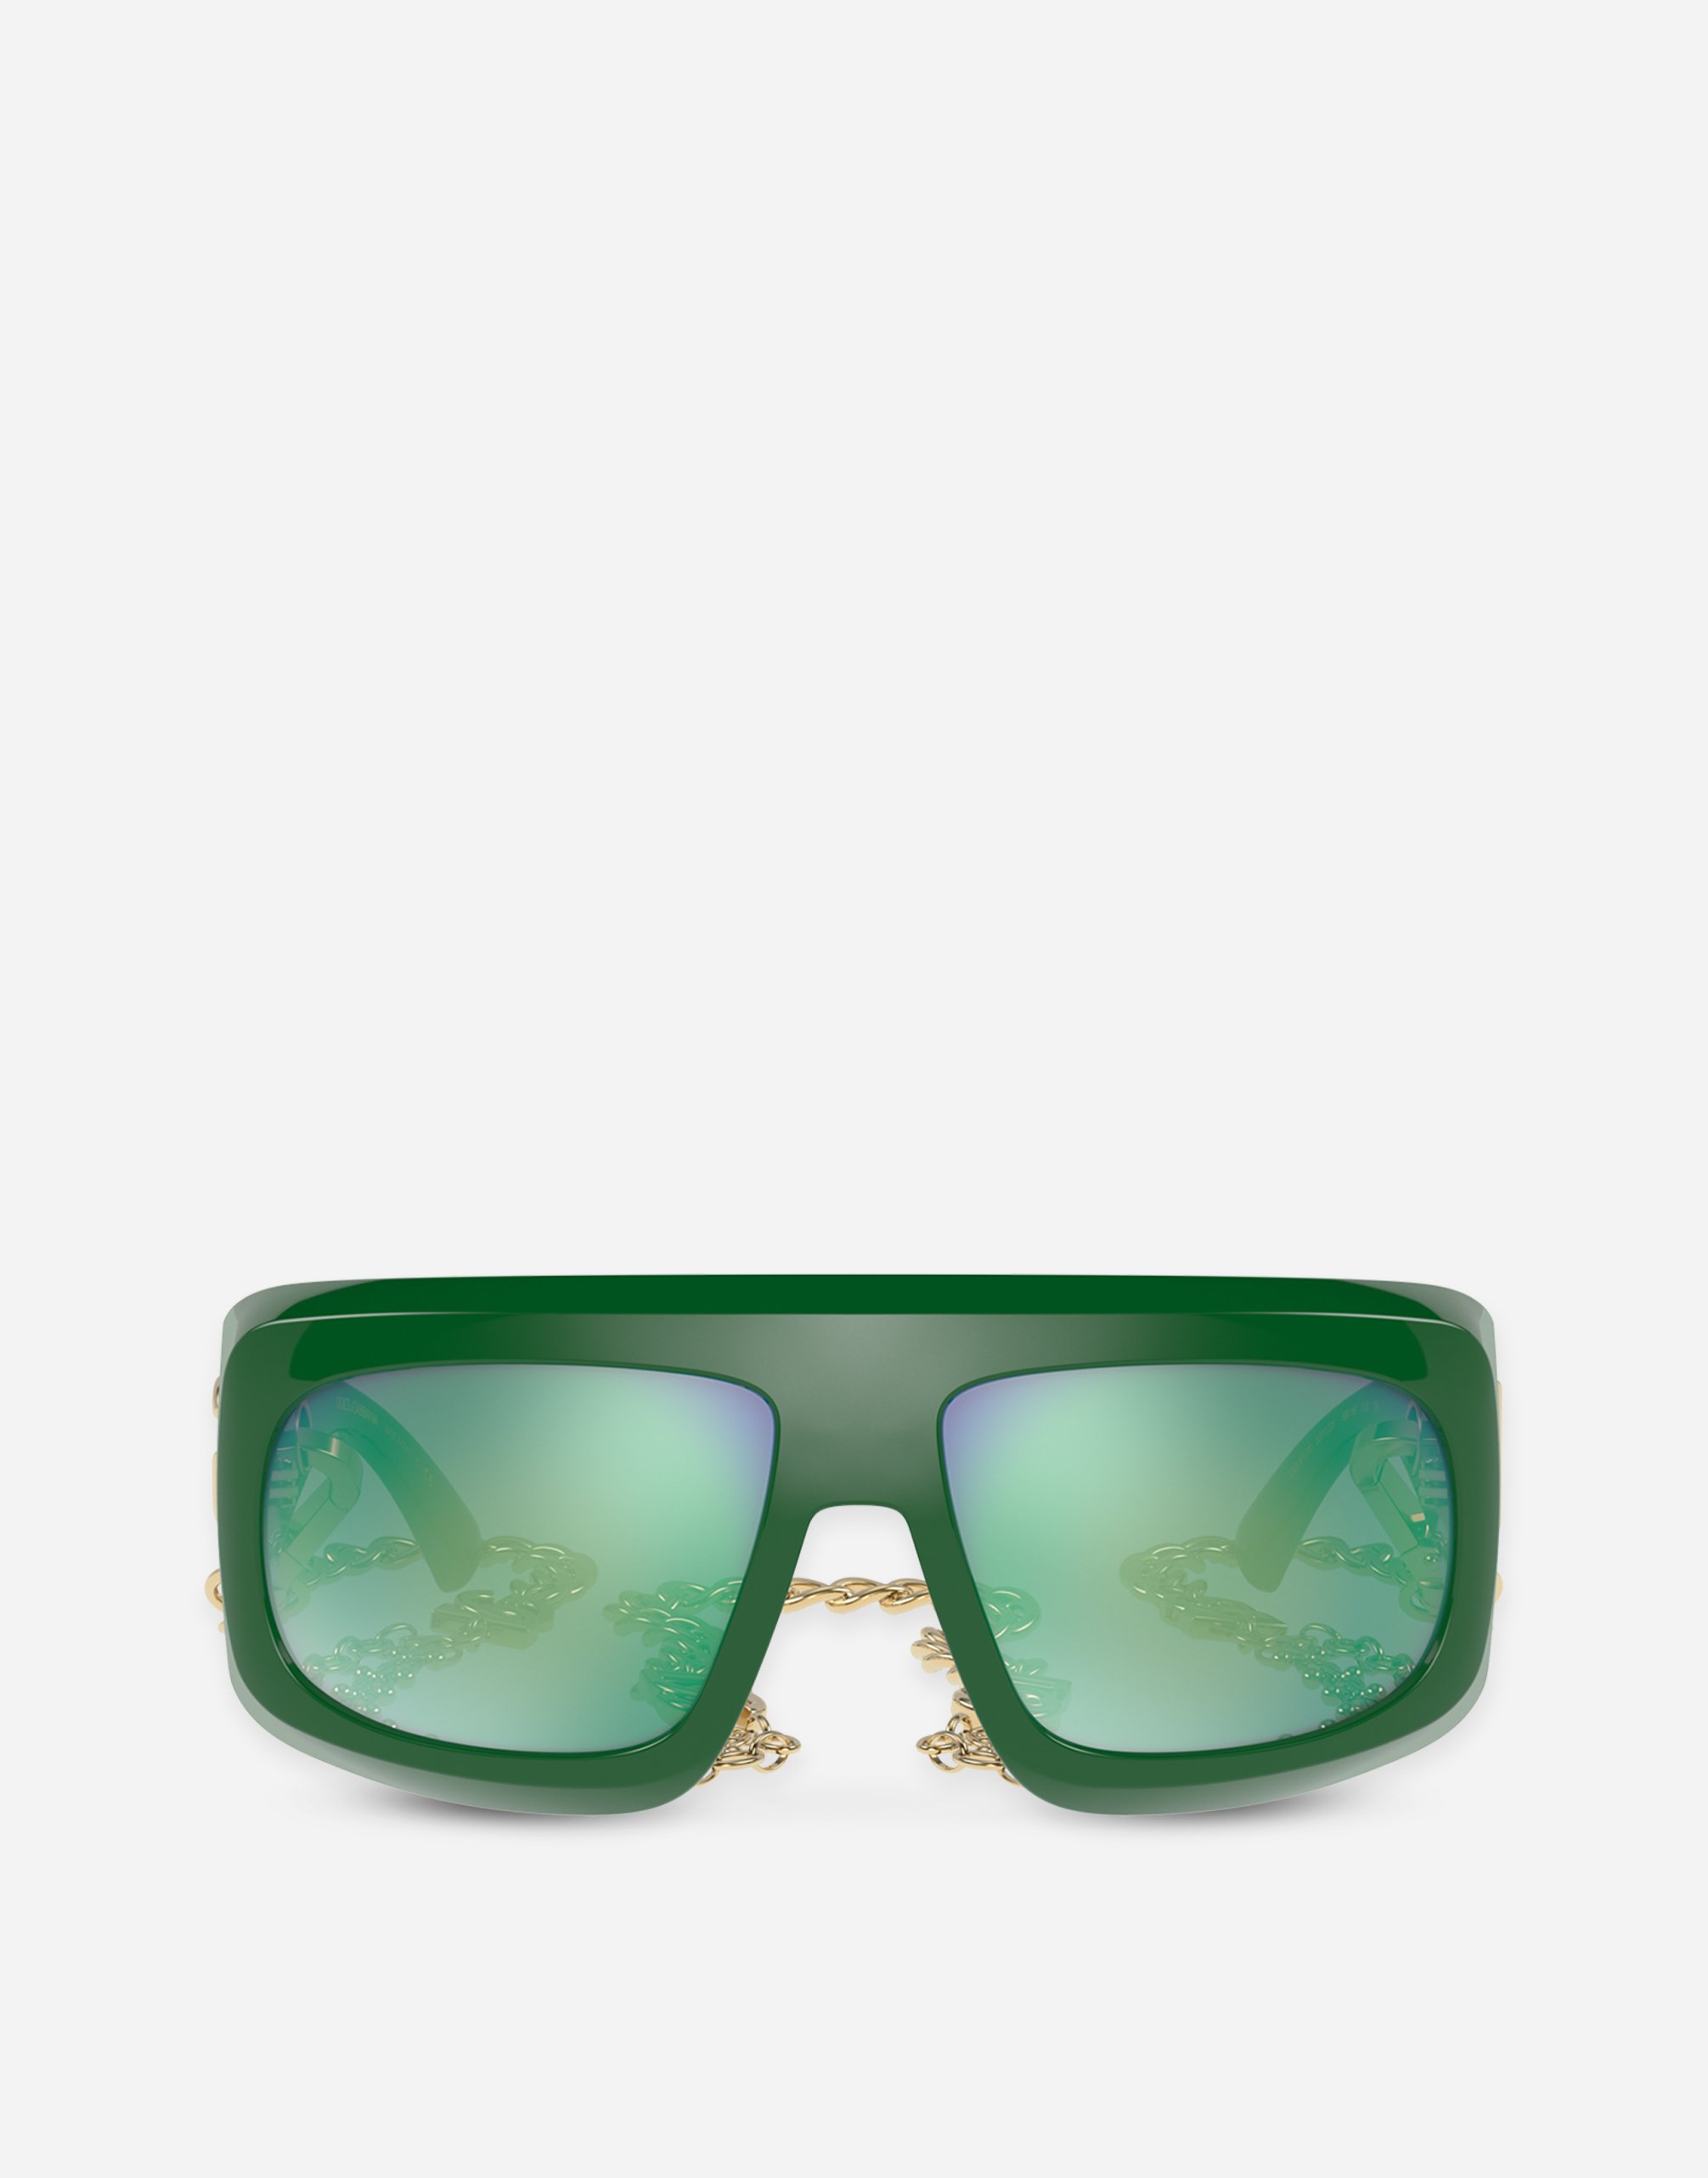 Joy Therapy sunglasses in Green